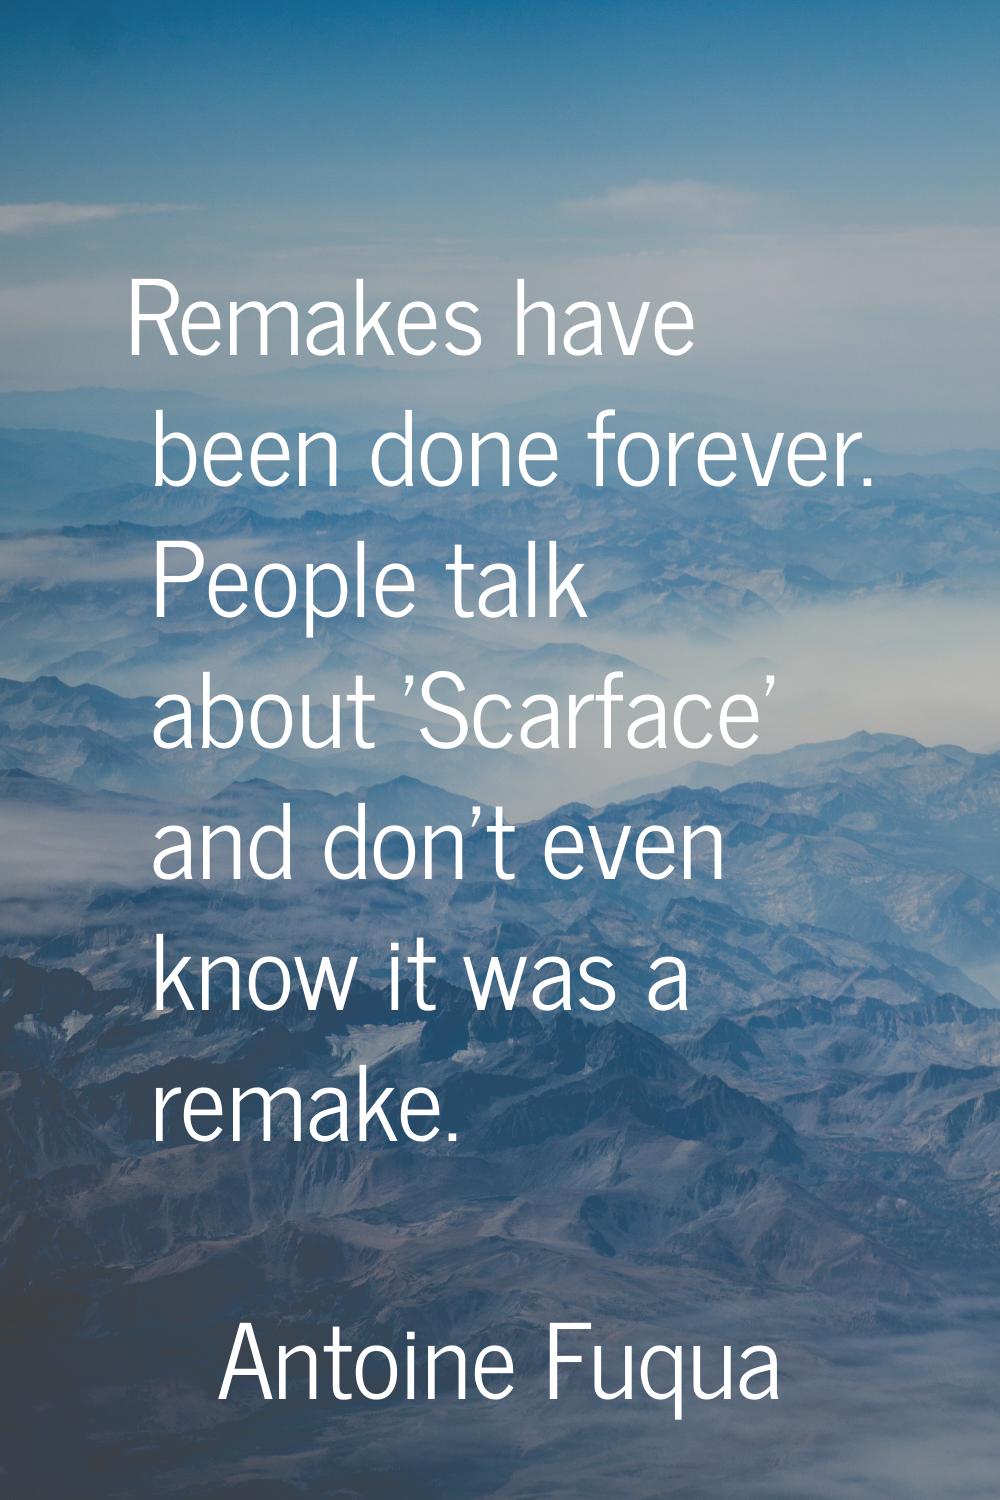 Remakes have been done forever. People talk about 'Scarface' and don't even know it was a remake.